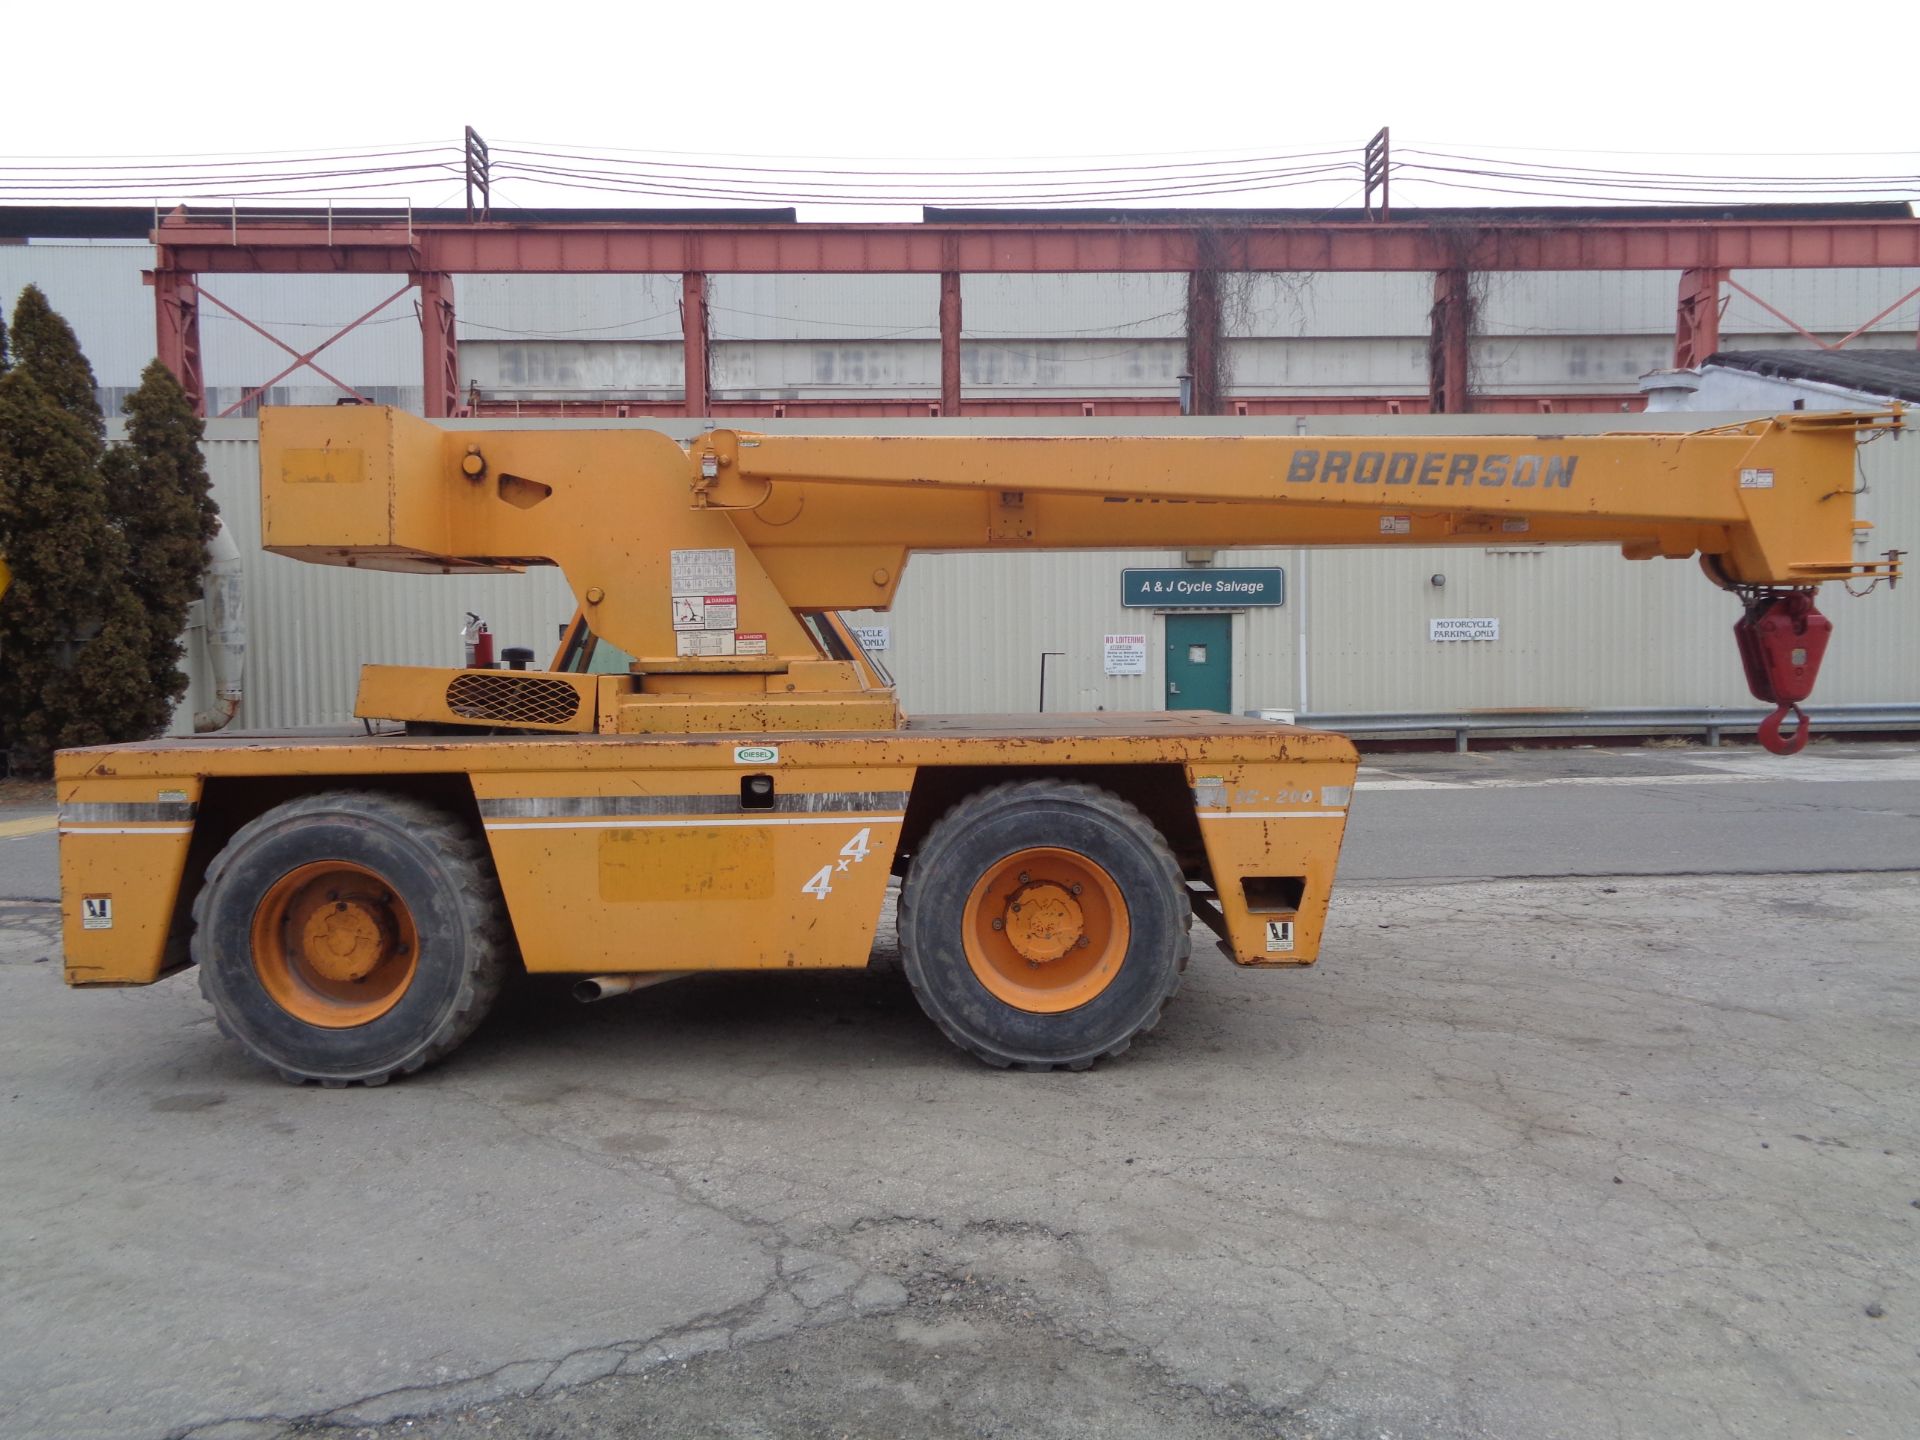 2005 Broderson IC200 2F 30,000lb Carry Deck Crane - Image 8 of 21